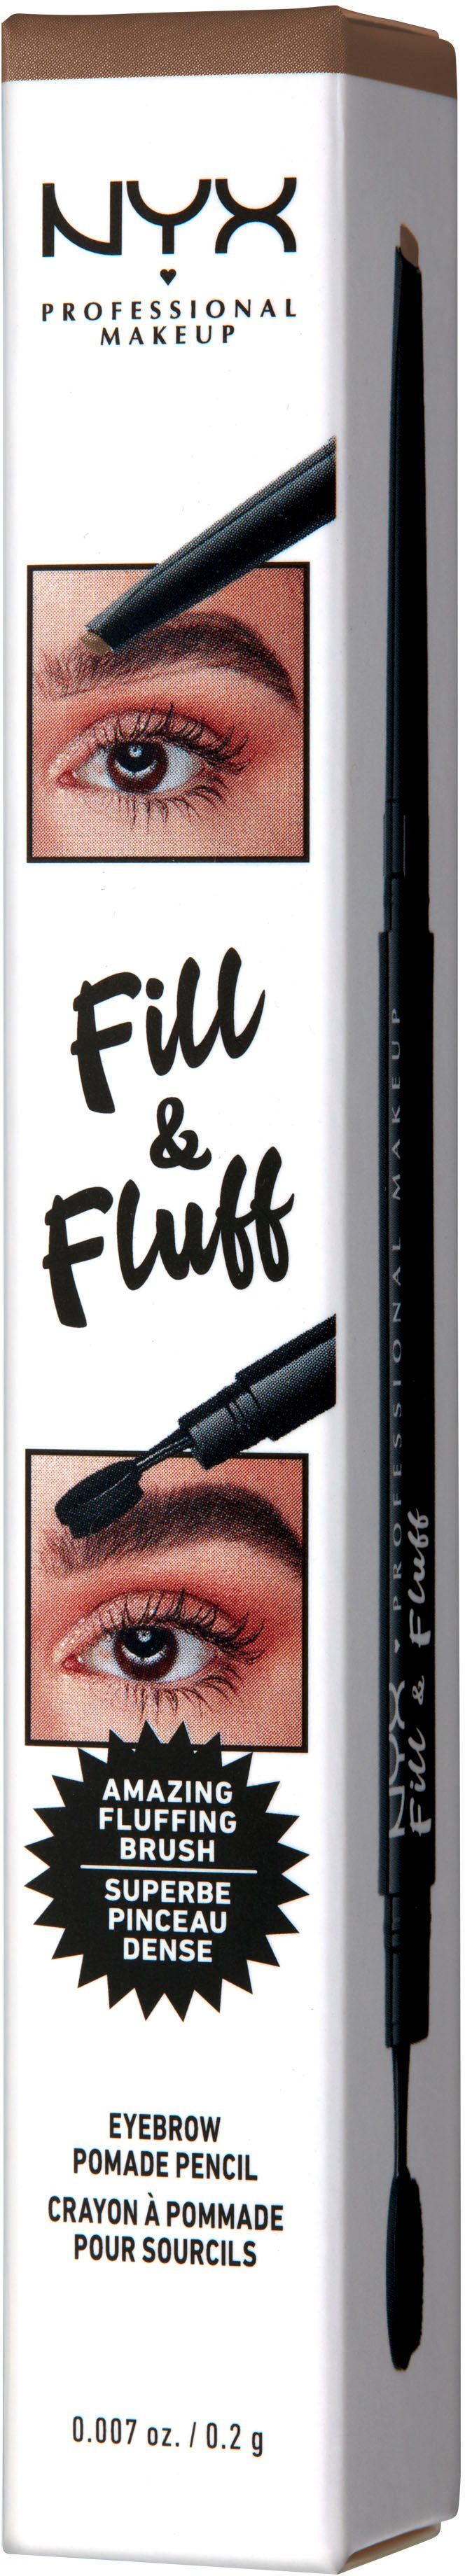 Fluff Makeup Professional & Pomade Eyebrow Fill Augenbrauen-Stift taupe Pencil NYX